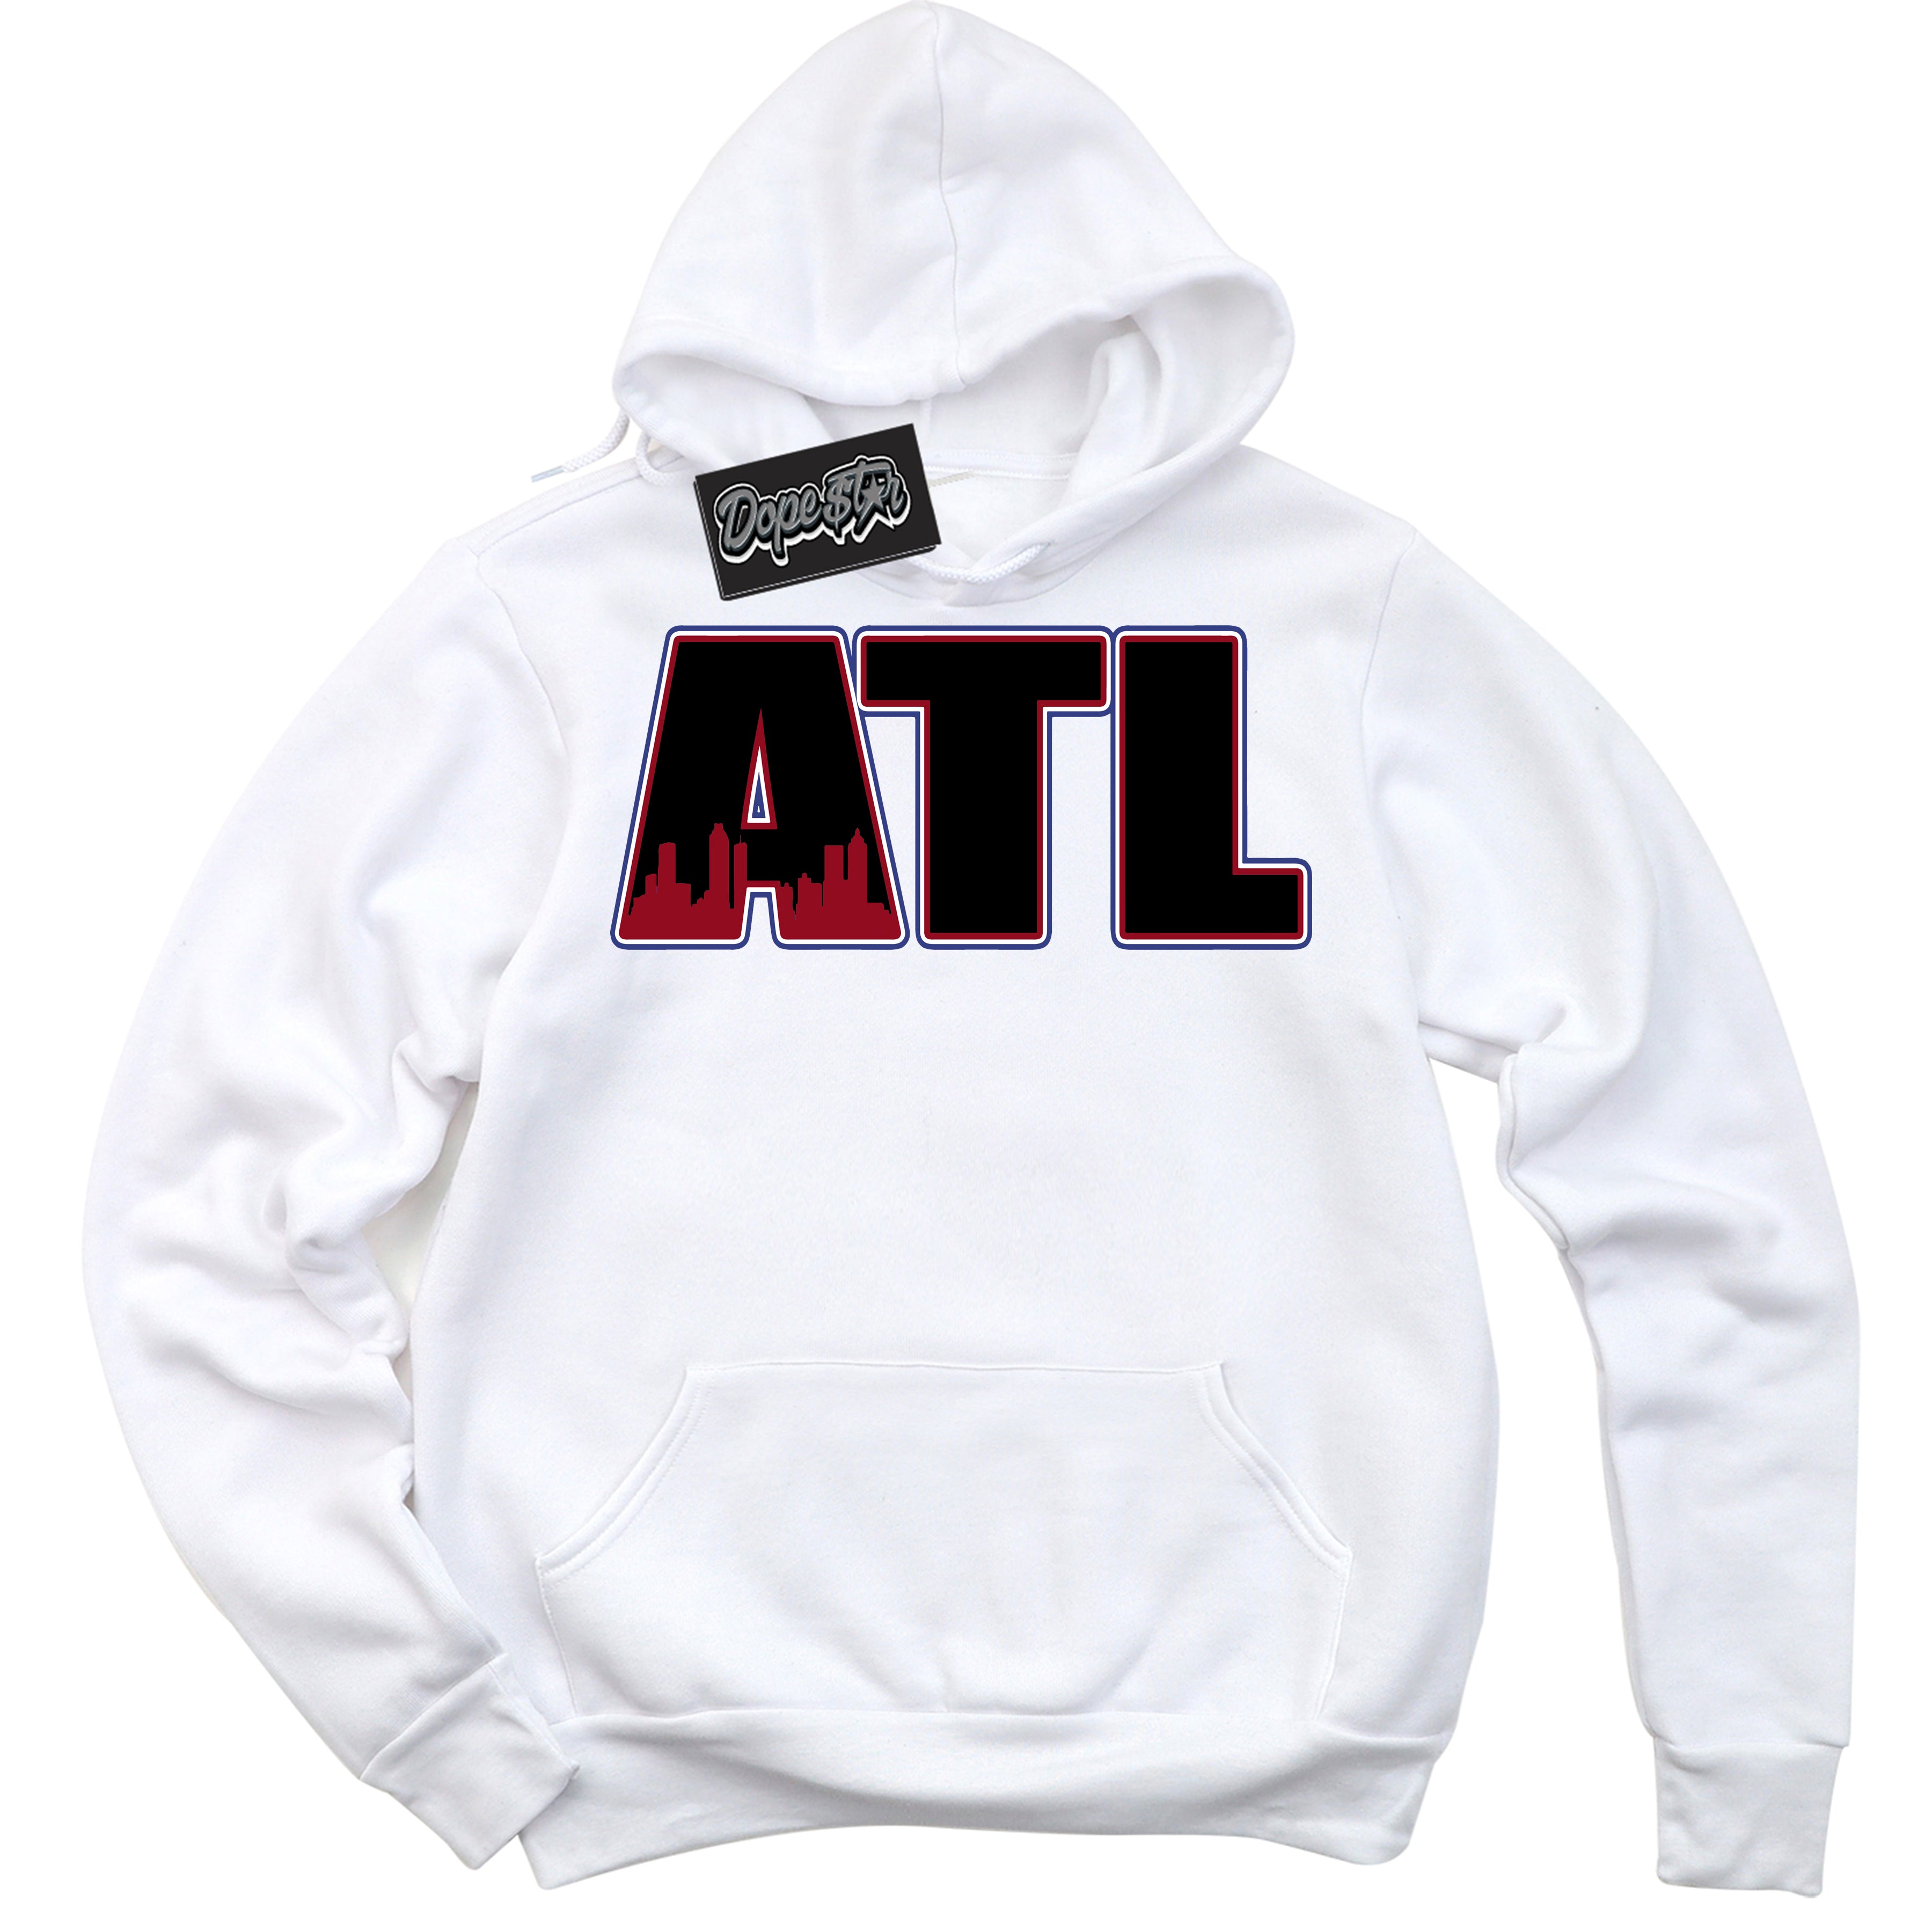 Cool White Hoodie with “ Atlanta ”  design that Perfectly Matches Playoffs 8s Sneakers.